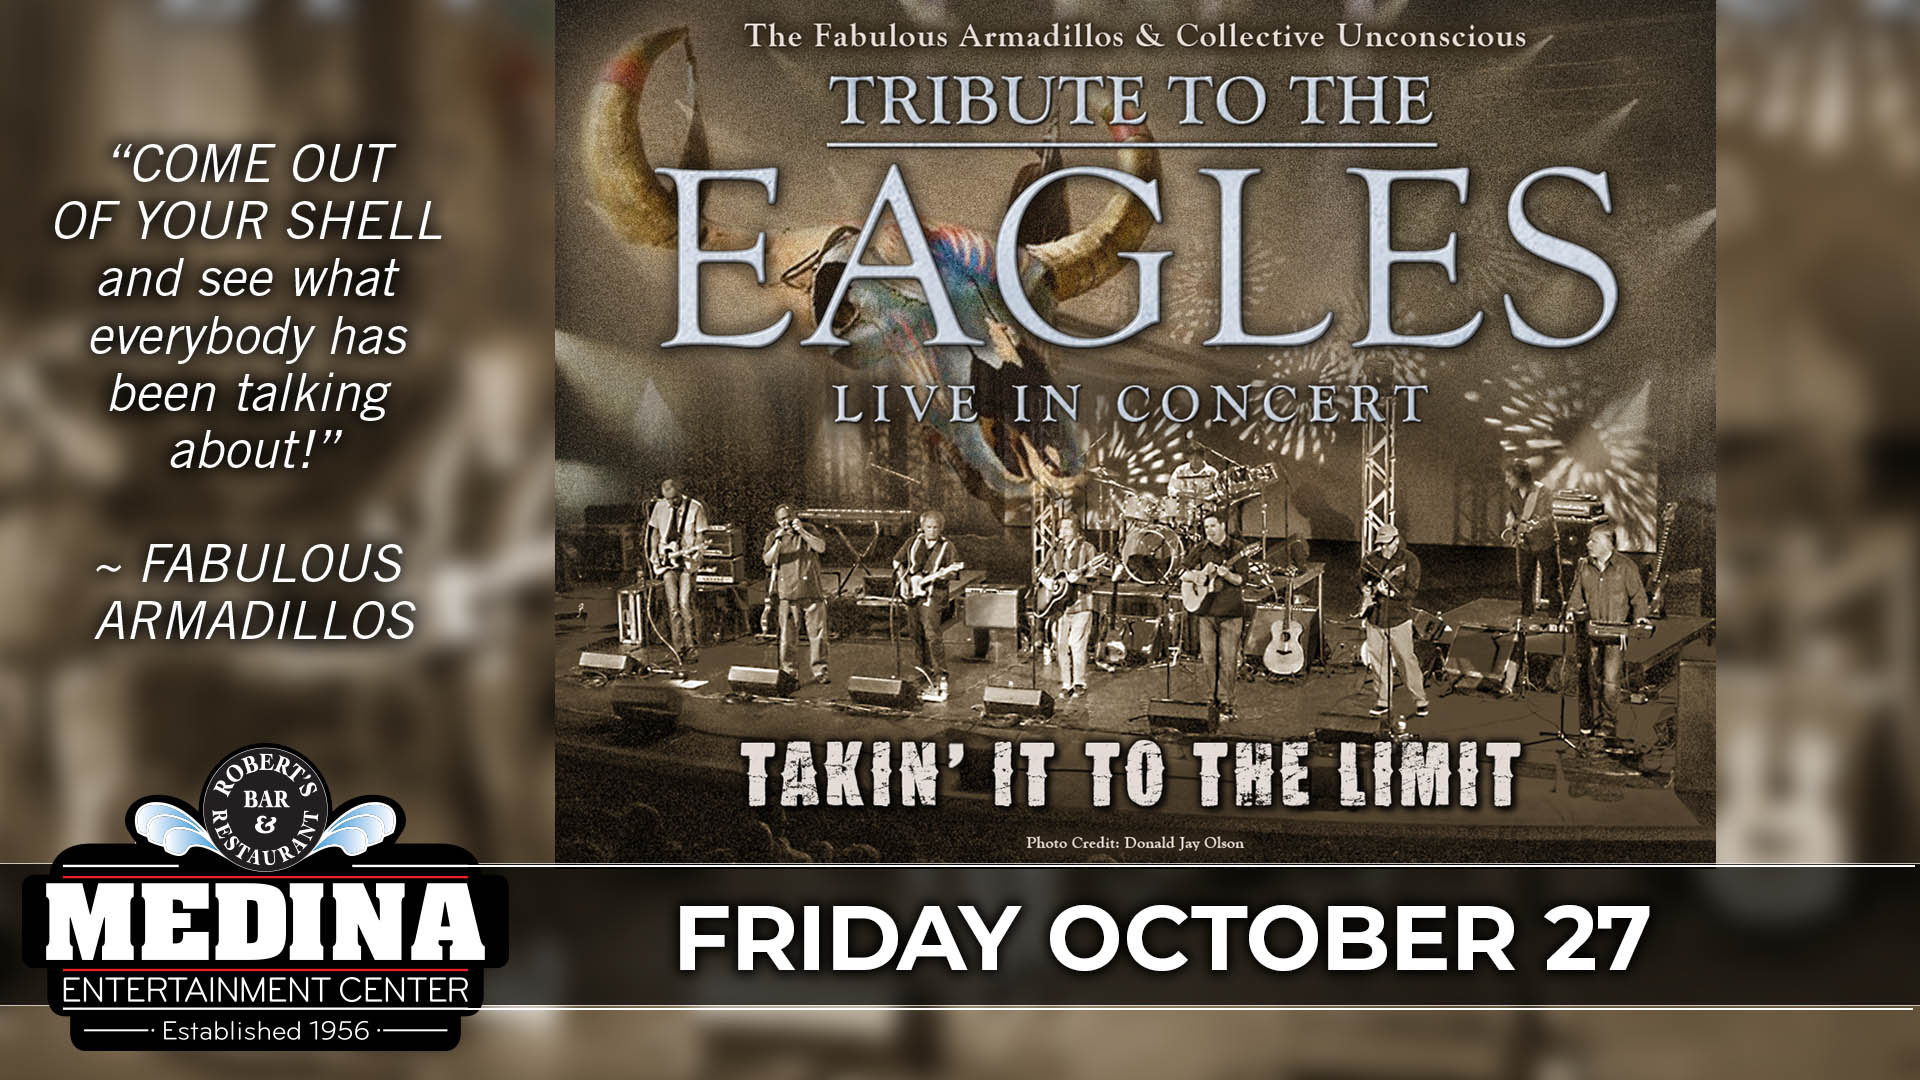 Takin’ It To The Limit A TRIBUTE TO THE EAGLES Featuring FABULOUS ARMADILLOS & COLLECTIVE UNCONSCIOUS Medina Entertainment Center Friday, October 27th, 2023 Doors: 7:30PM | Music: 8:00PM | 21+ Tickets on-sale Friday, June 23 at 11am Ticket Prices: $36.00 (Gold Seating), $31.00 (Silver Seating) & $26.00 (GA Seating) plus applicable fees